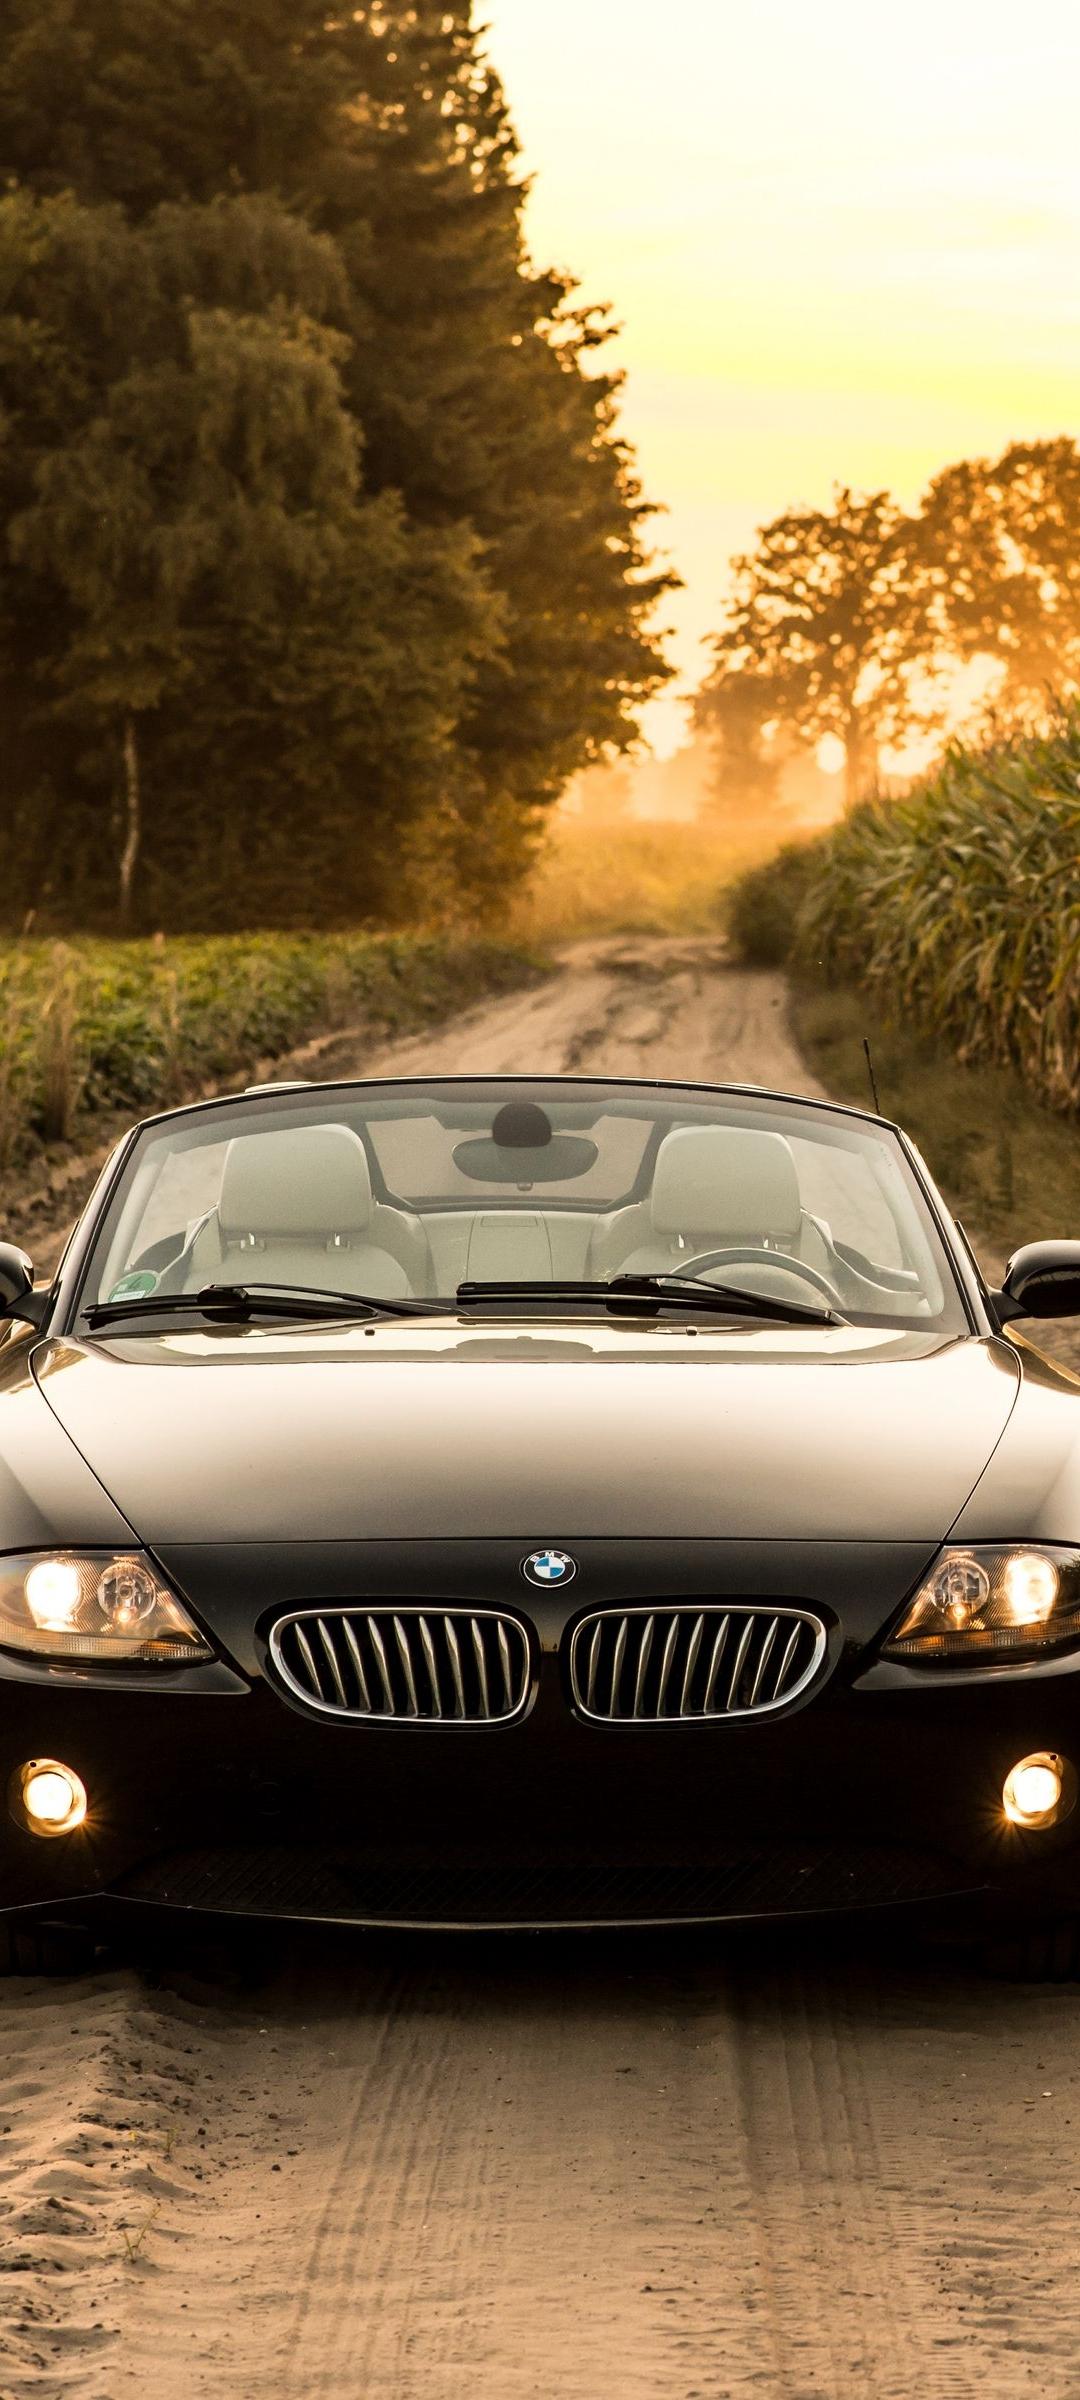 BMW Z4 on the road at sunset - BMW